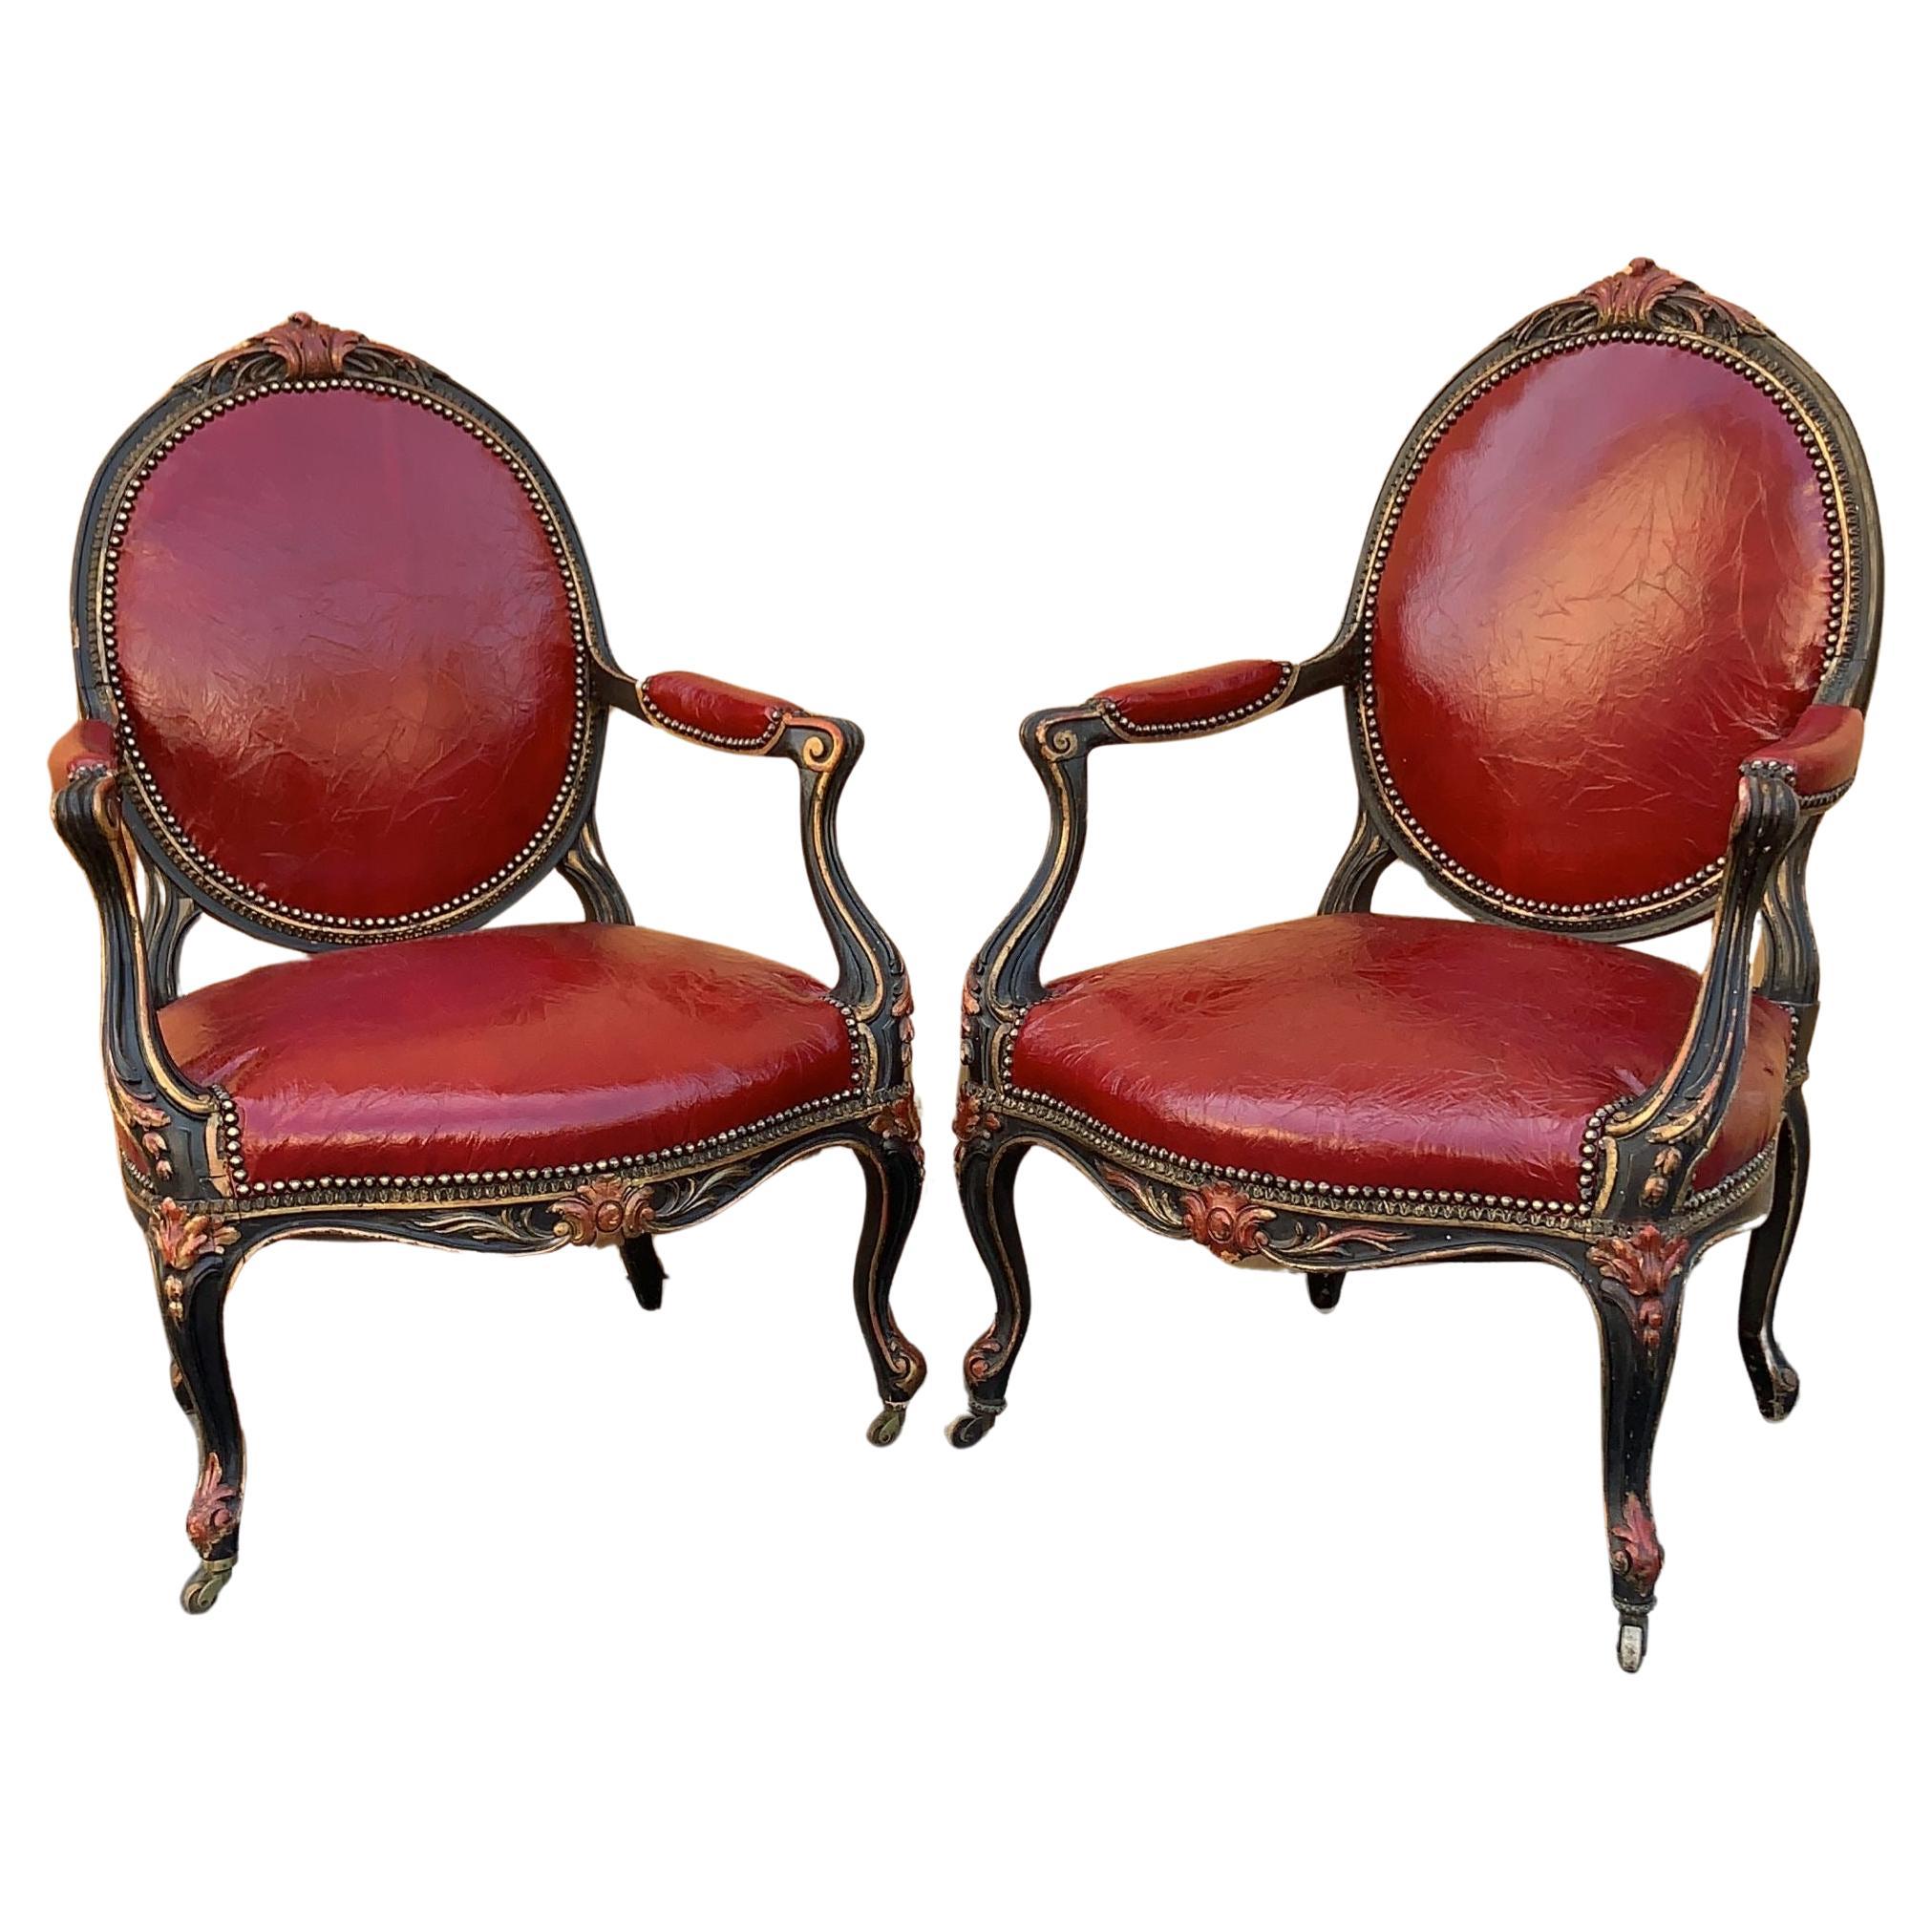 Antique French Napoleon III Carved Armchairs Newly Upholstered In Leather - Pair For Sale